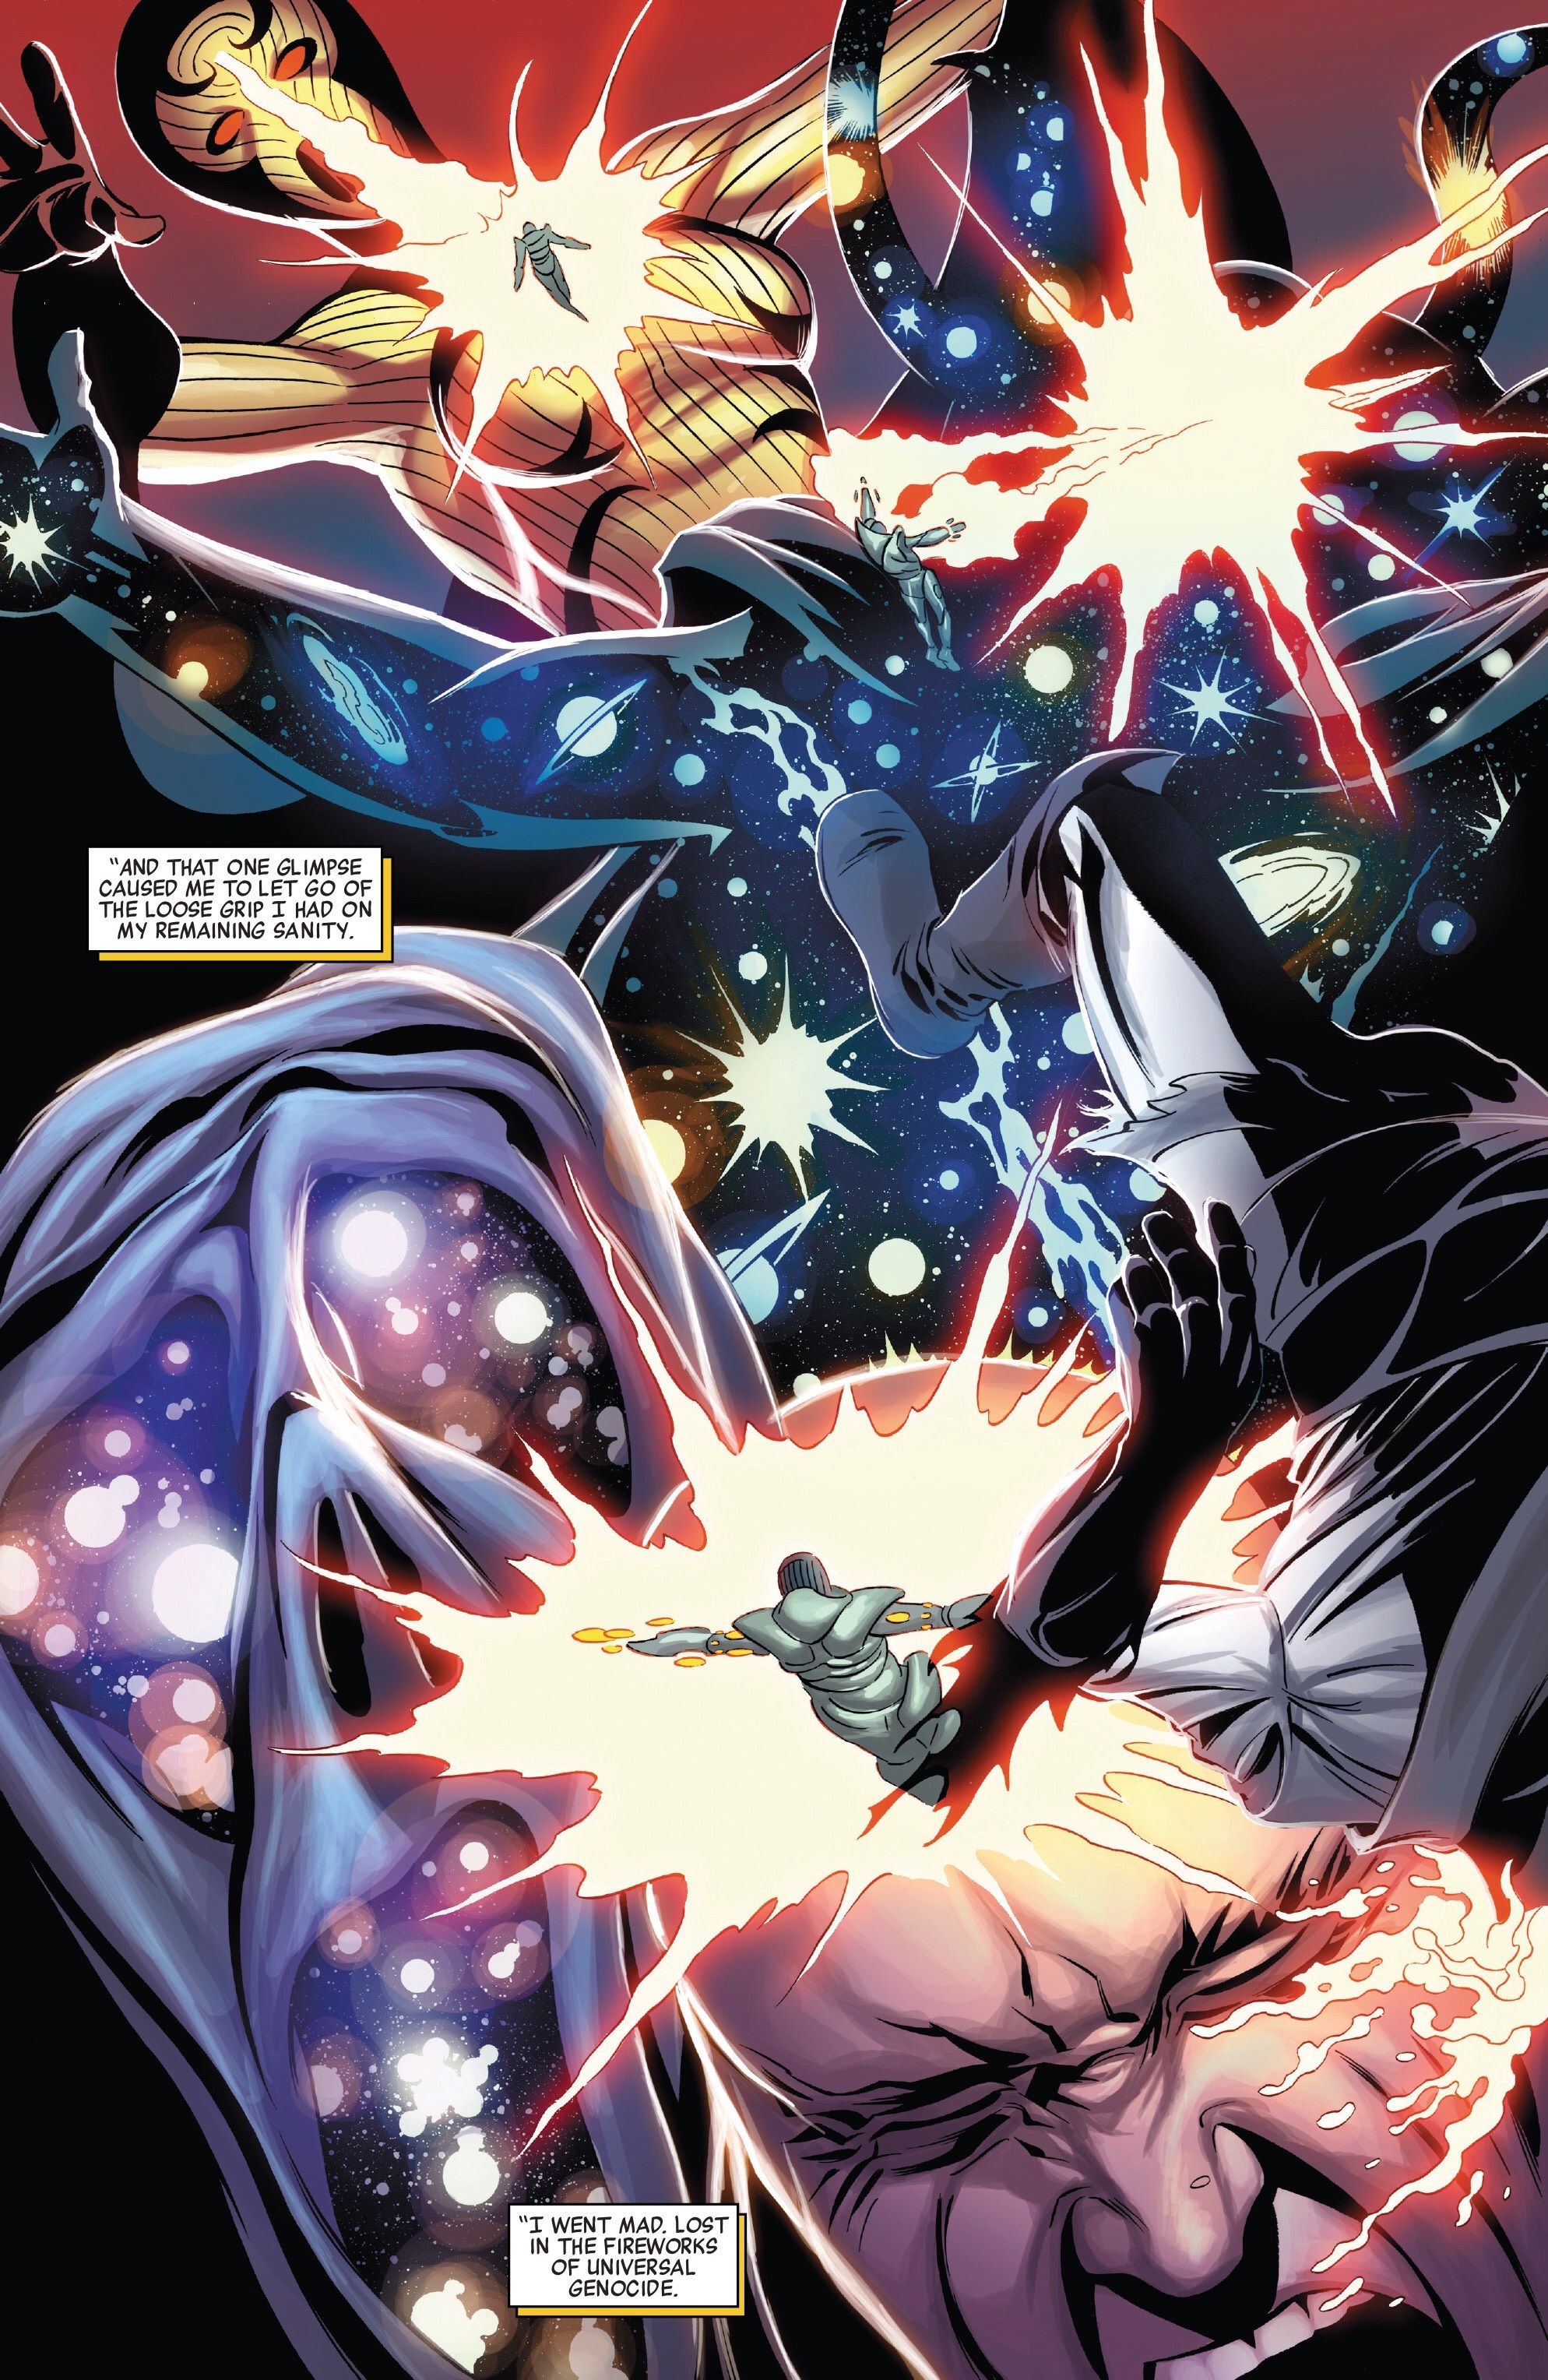 The Beyonders vs Adult Franklin Richards, The Mad Celestials